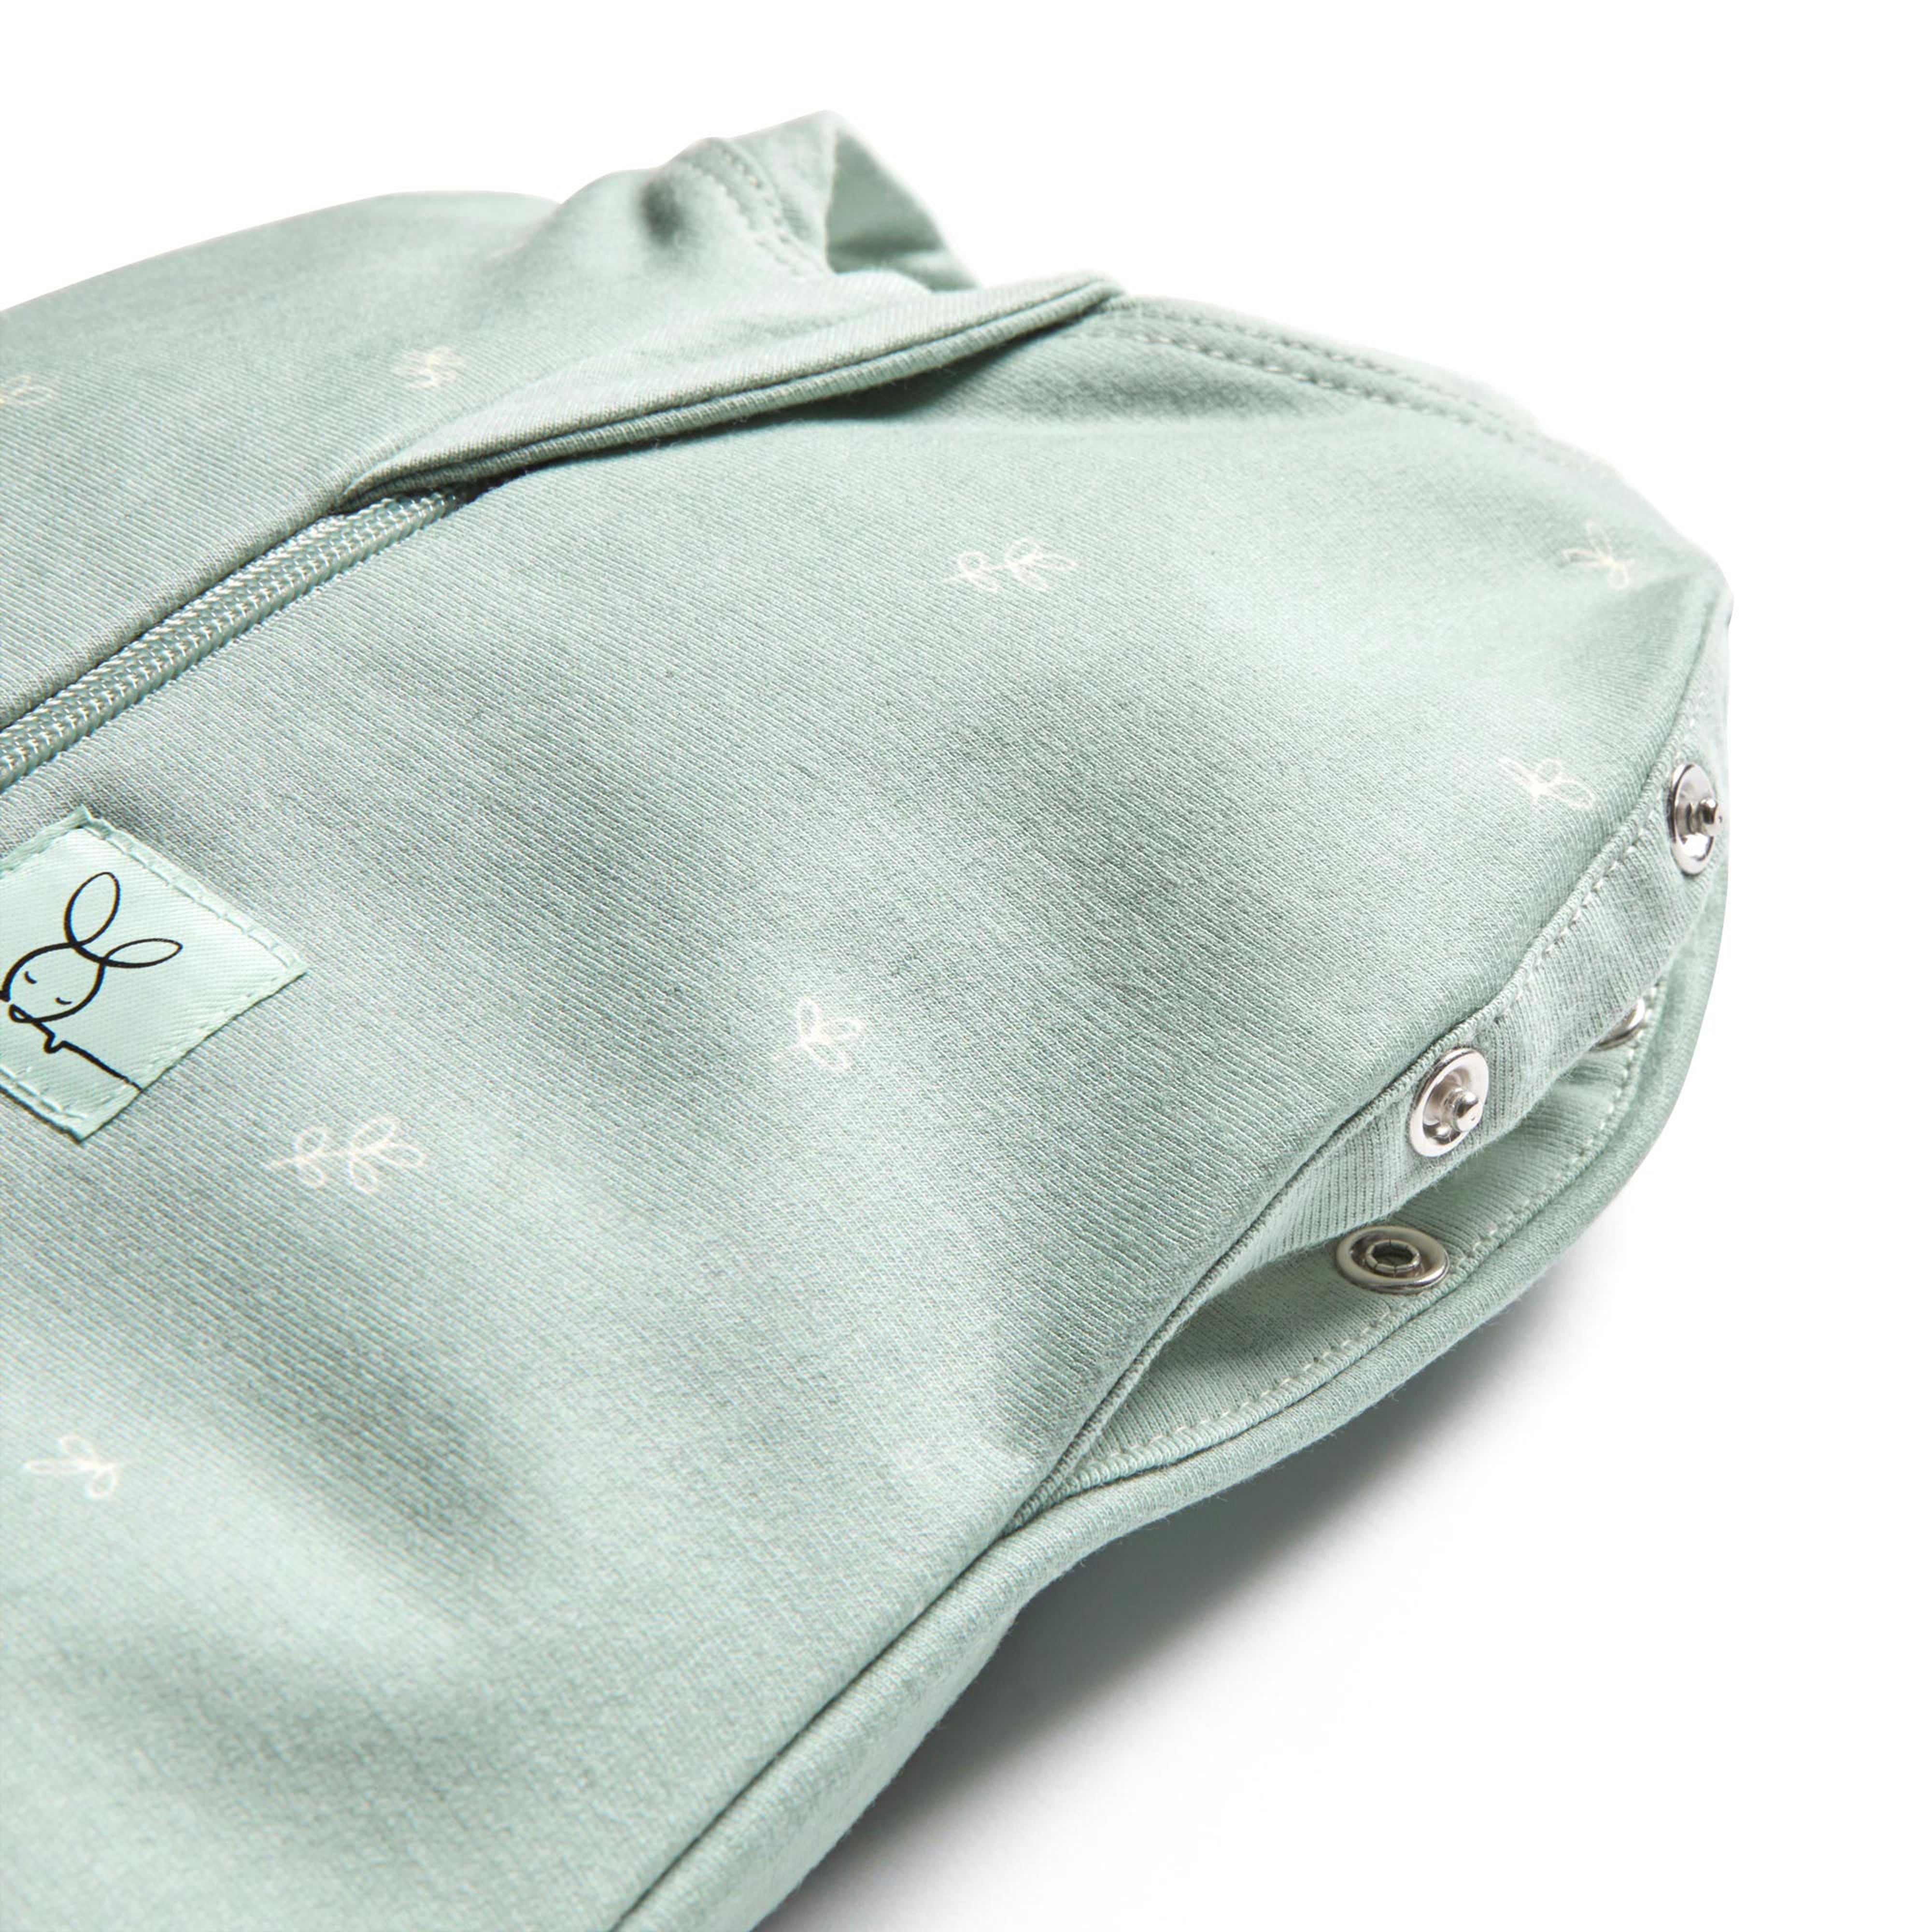 ergopouch-cocoon-swaddle-bag-1-0-tog-grey-marle-ergo-zepco-1-0t00-03mgm18- (4)